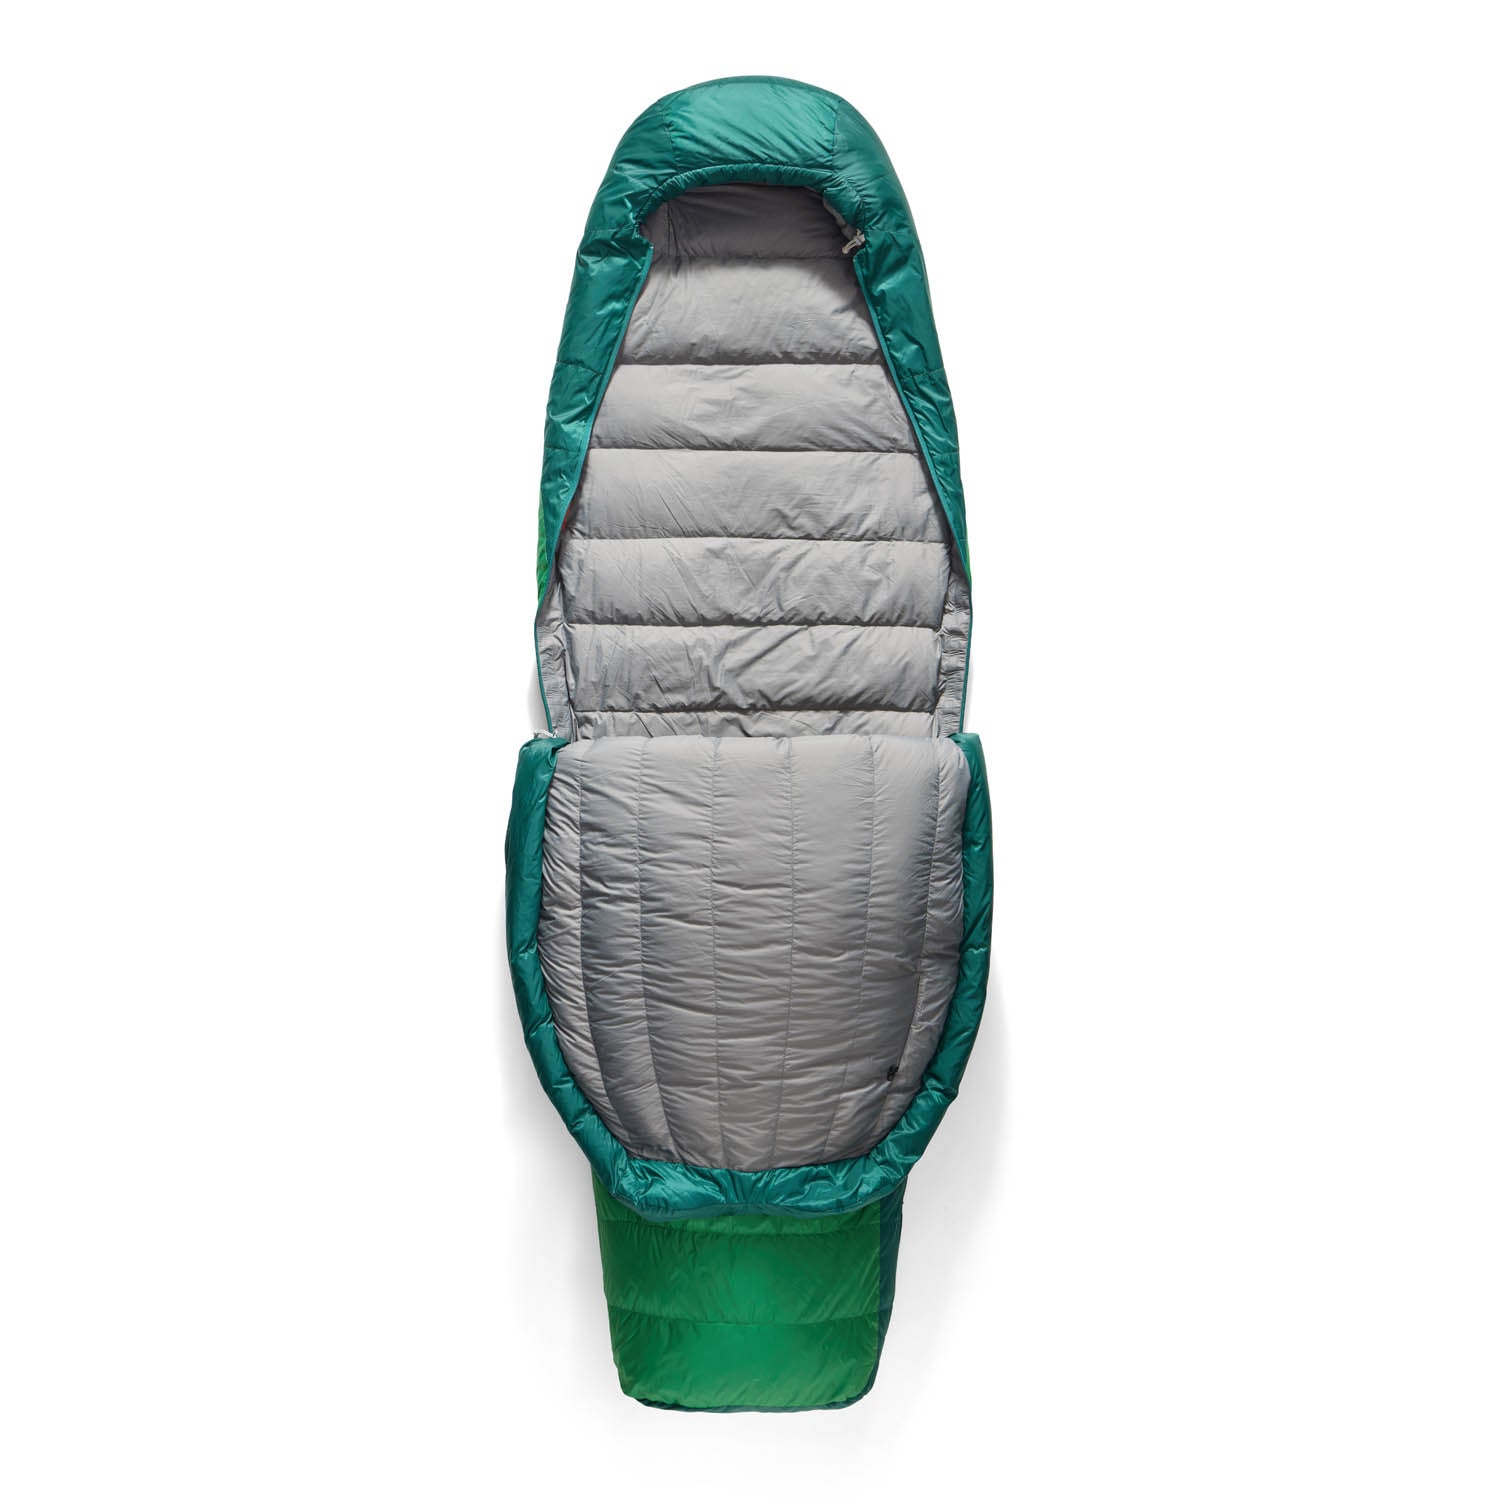 Ascent Down Sleeping Bag 15F - Long | Sea to Summit